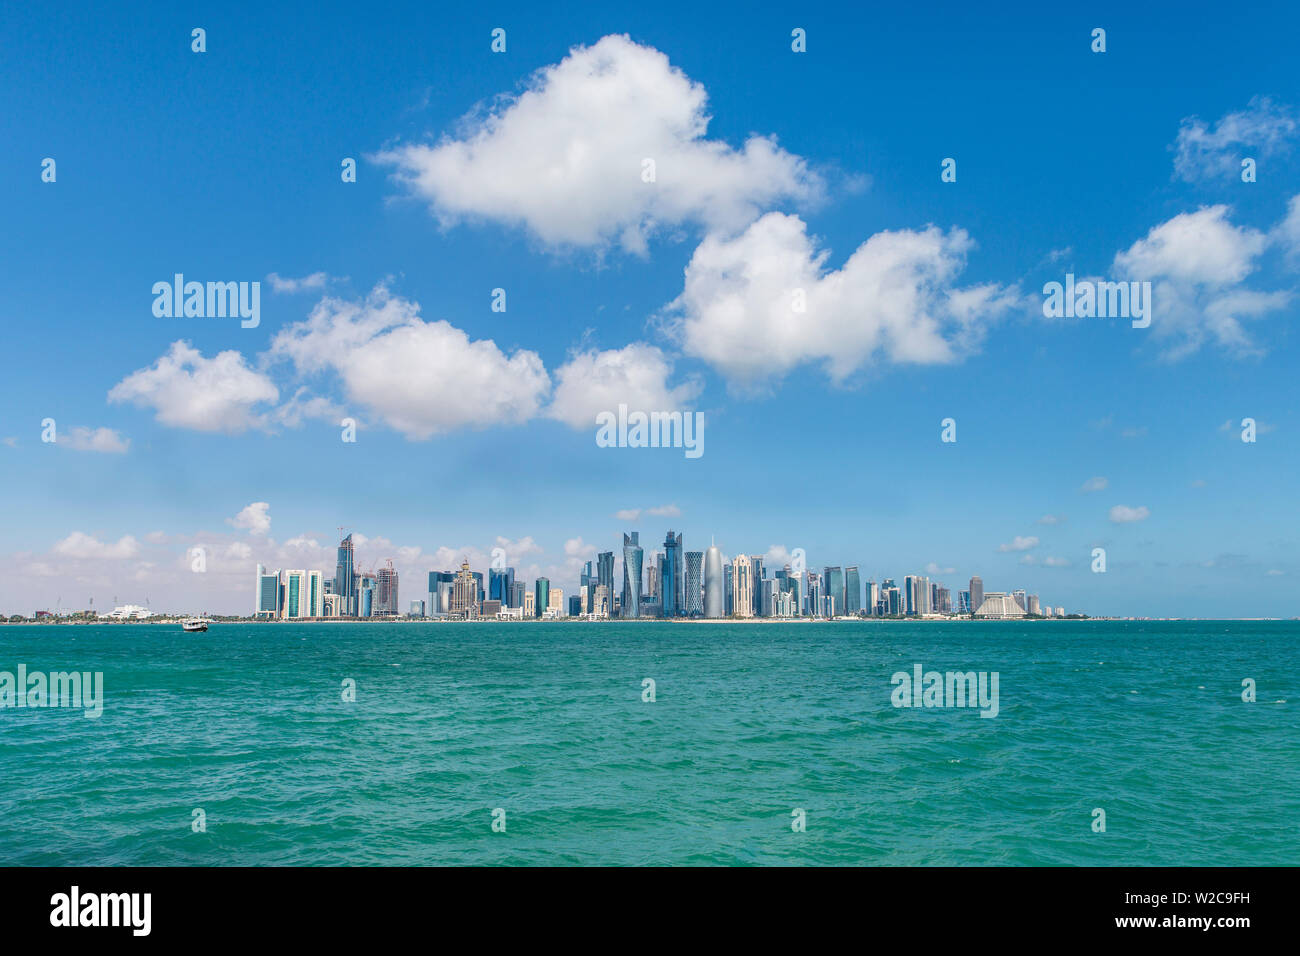 Qatar, Doha, new skyline of the West Bay central financial district of Doha Stock Photo